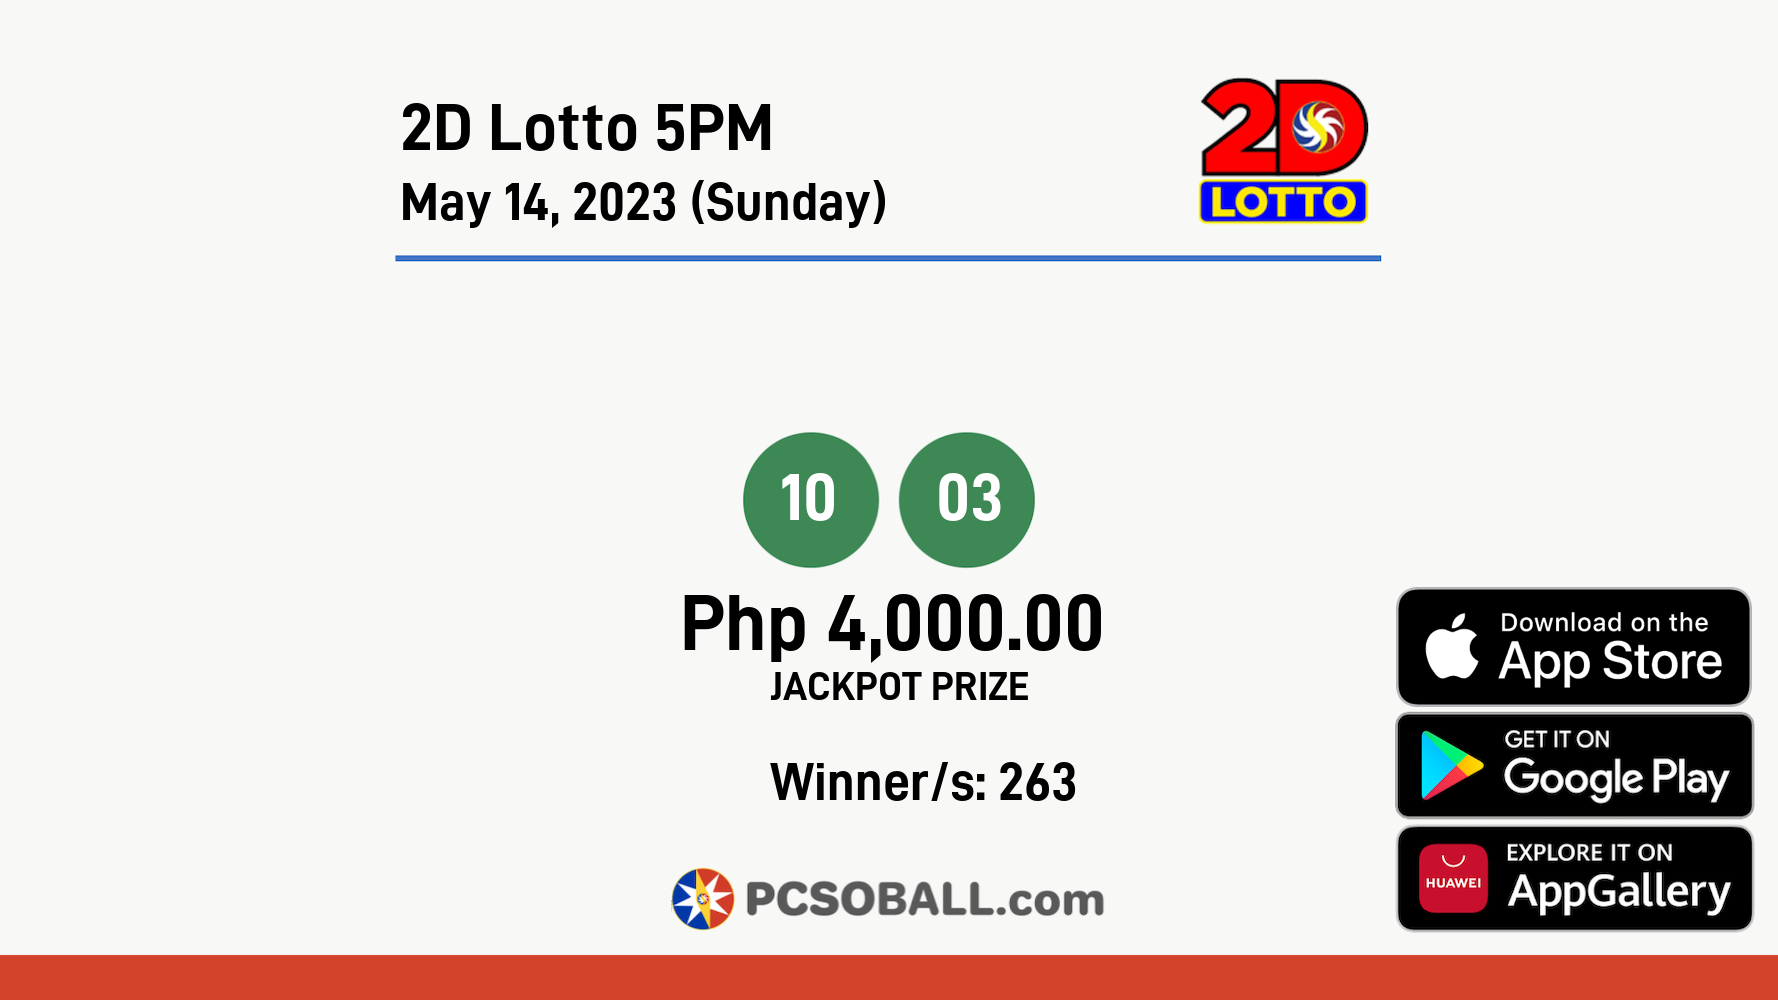 2D Lotto 5PM May 14, 2023 (Sunday) Result